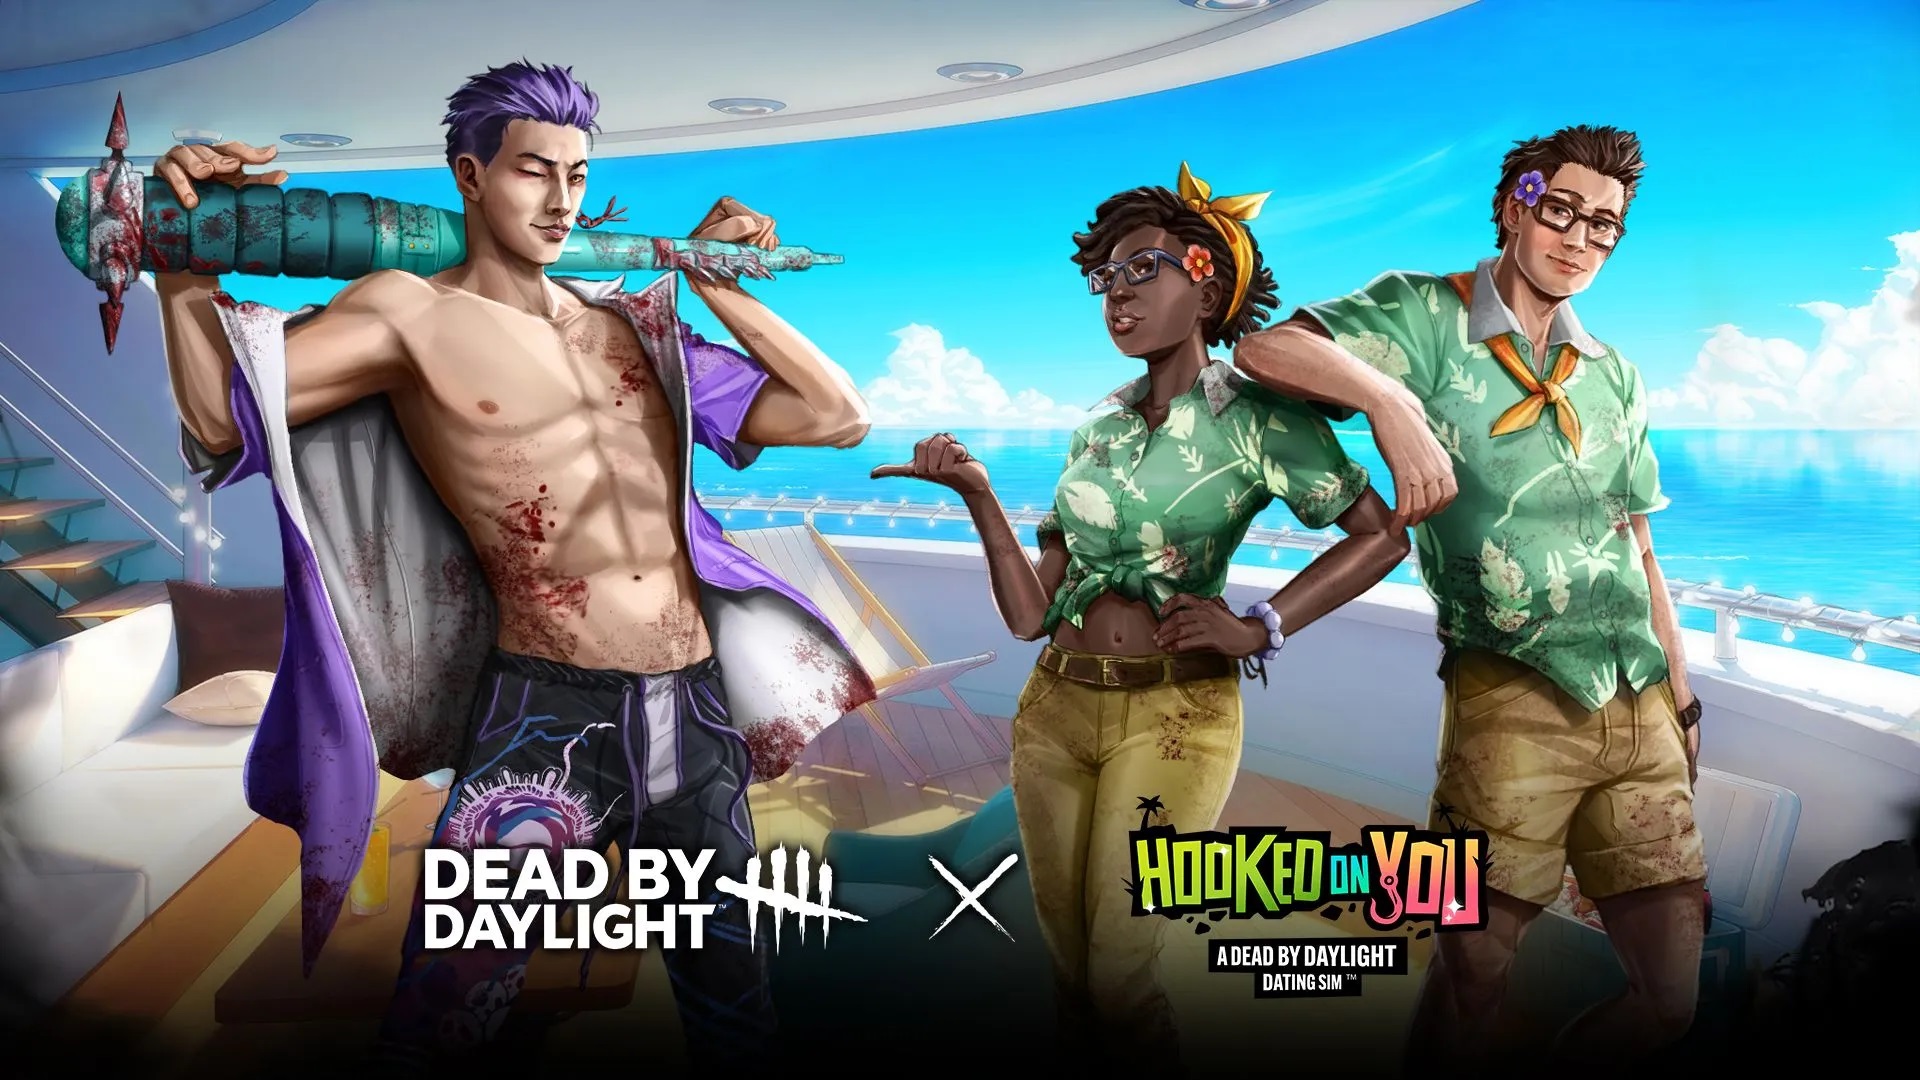 The Making of Hooked on You, the Dead by Daylight Dating Sim Built On the  Strangest Fan Service